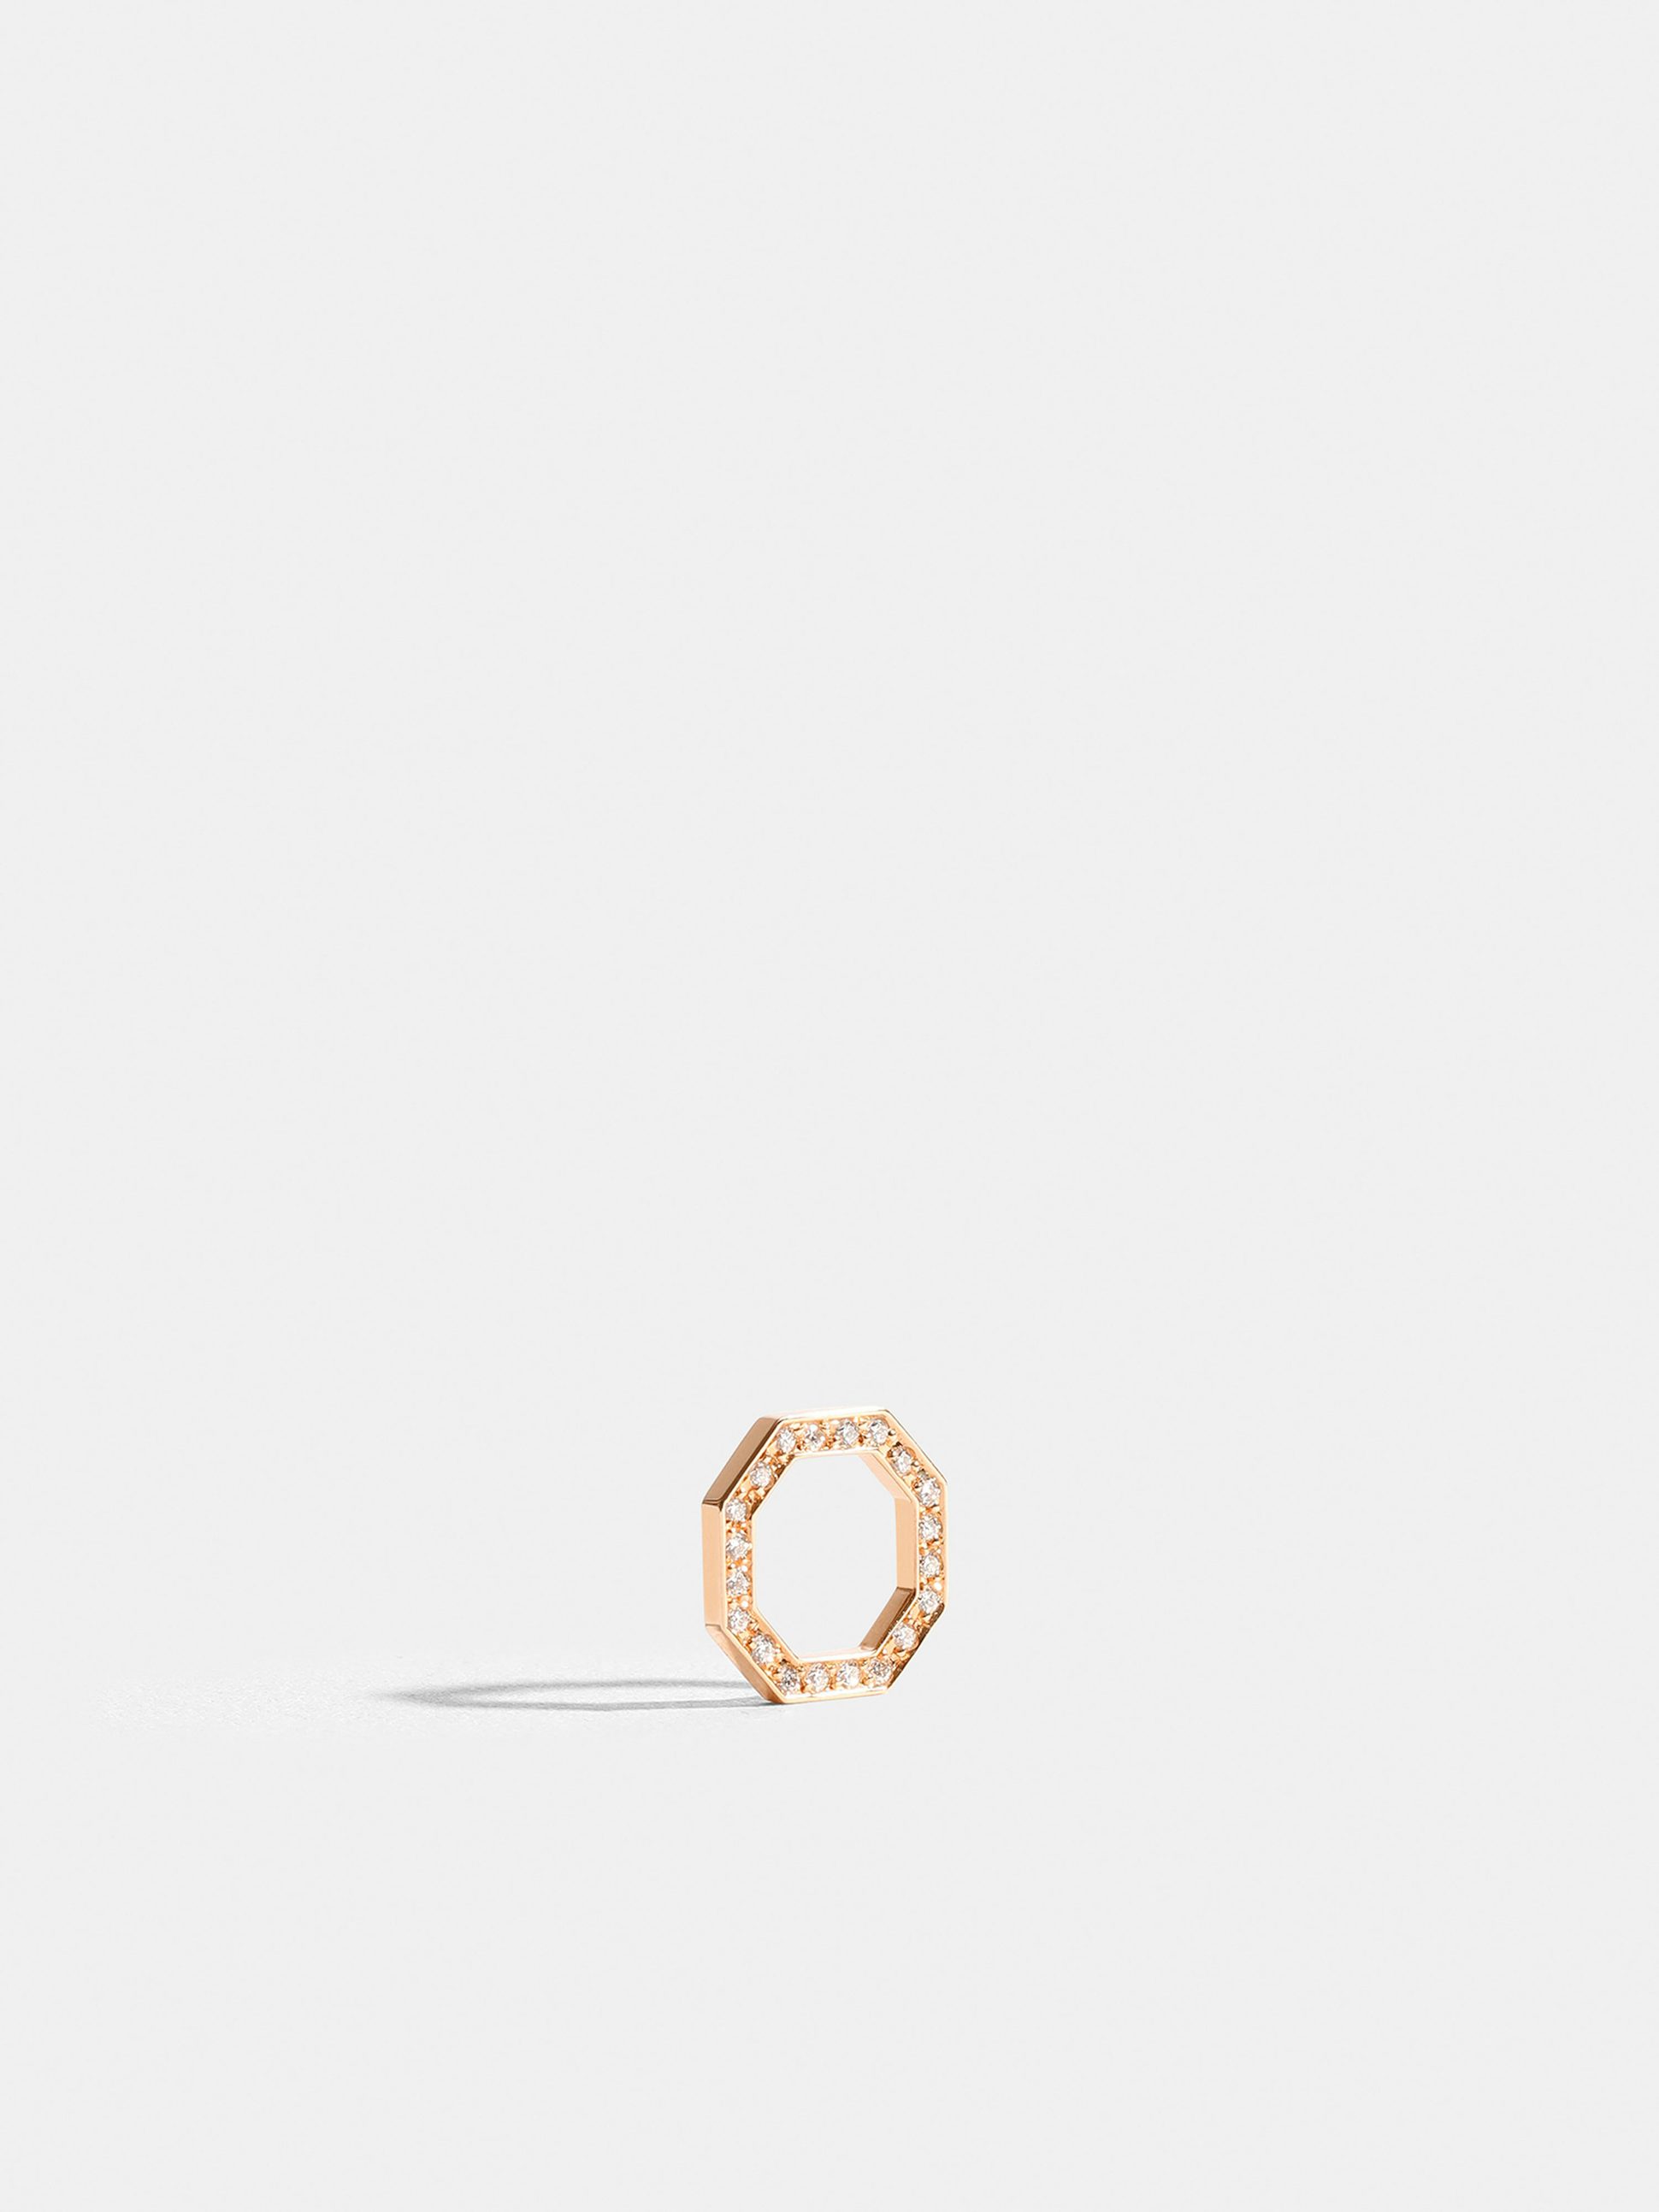 Octogone motif in 18k Fairmined ethical rose gold, paved with lab-grown diamonds, on a cord.